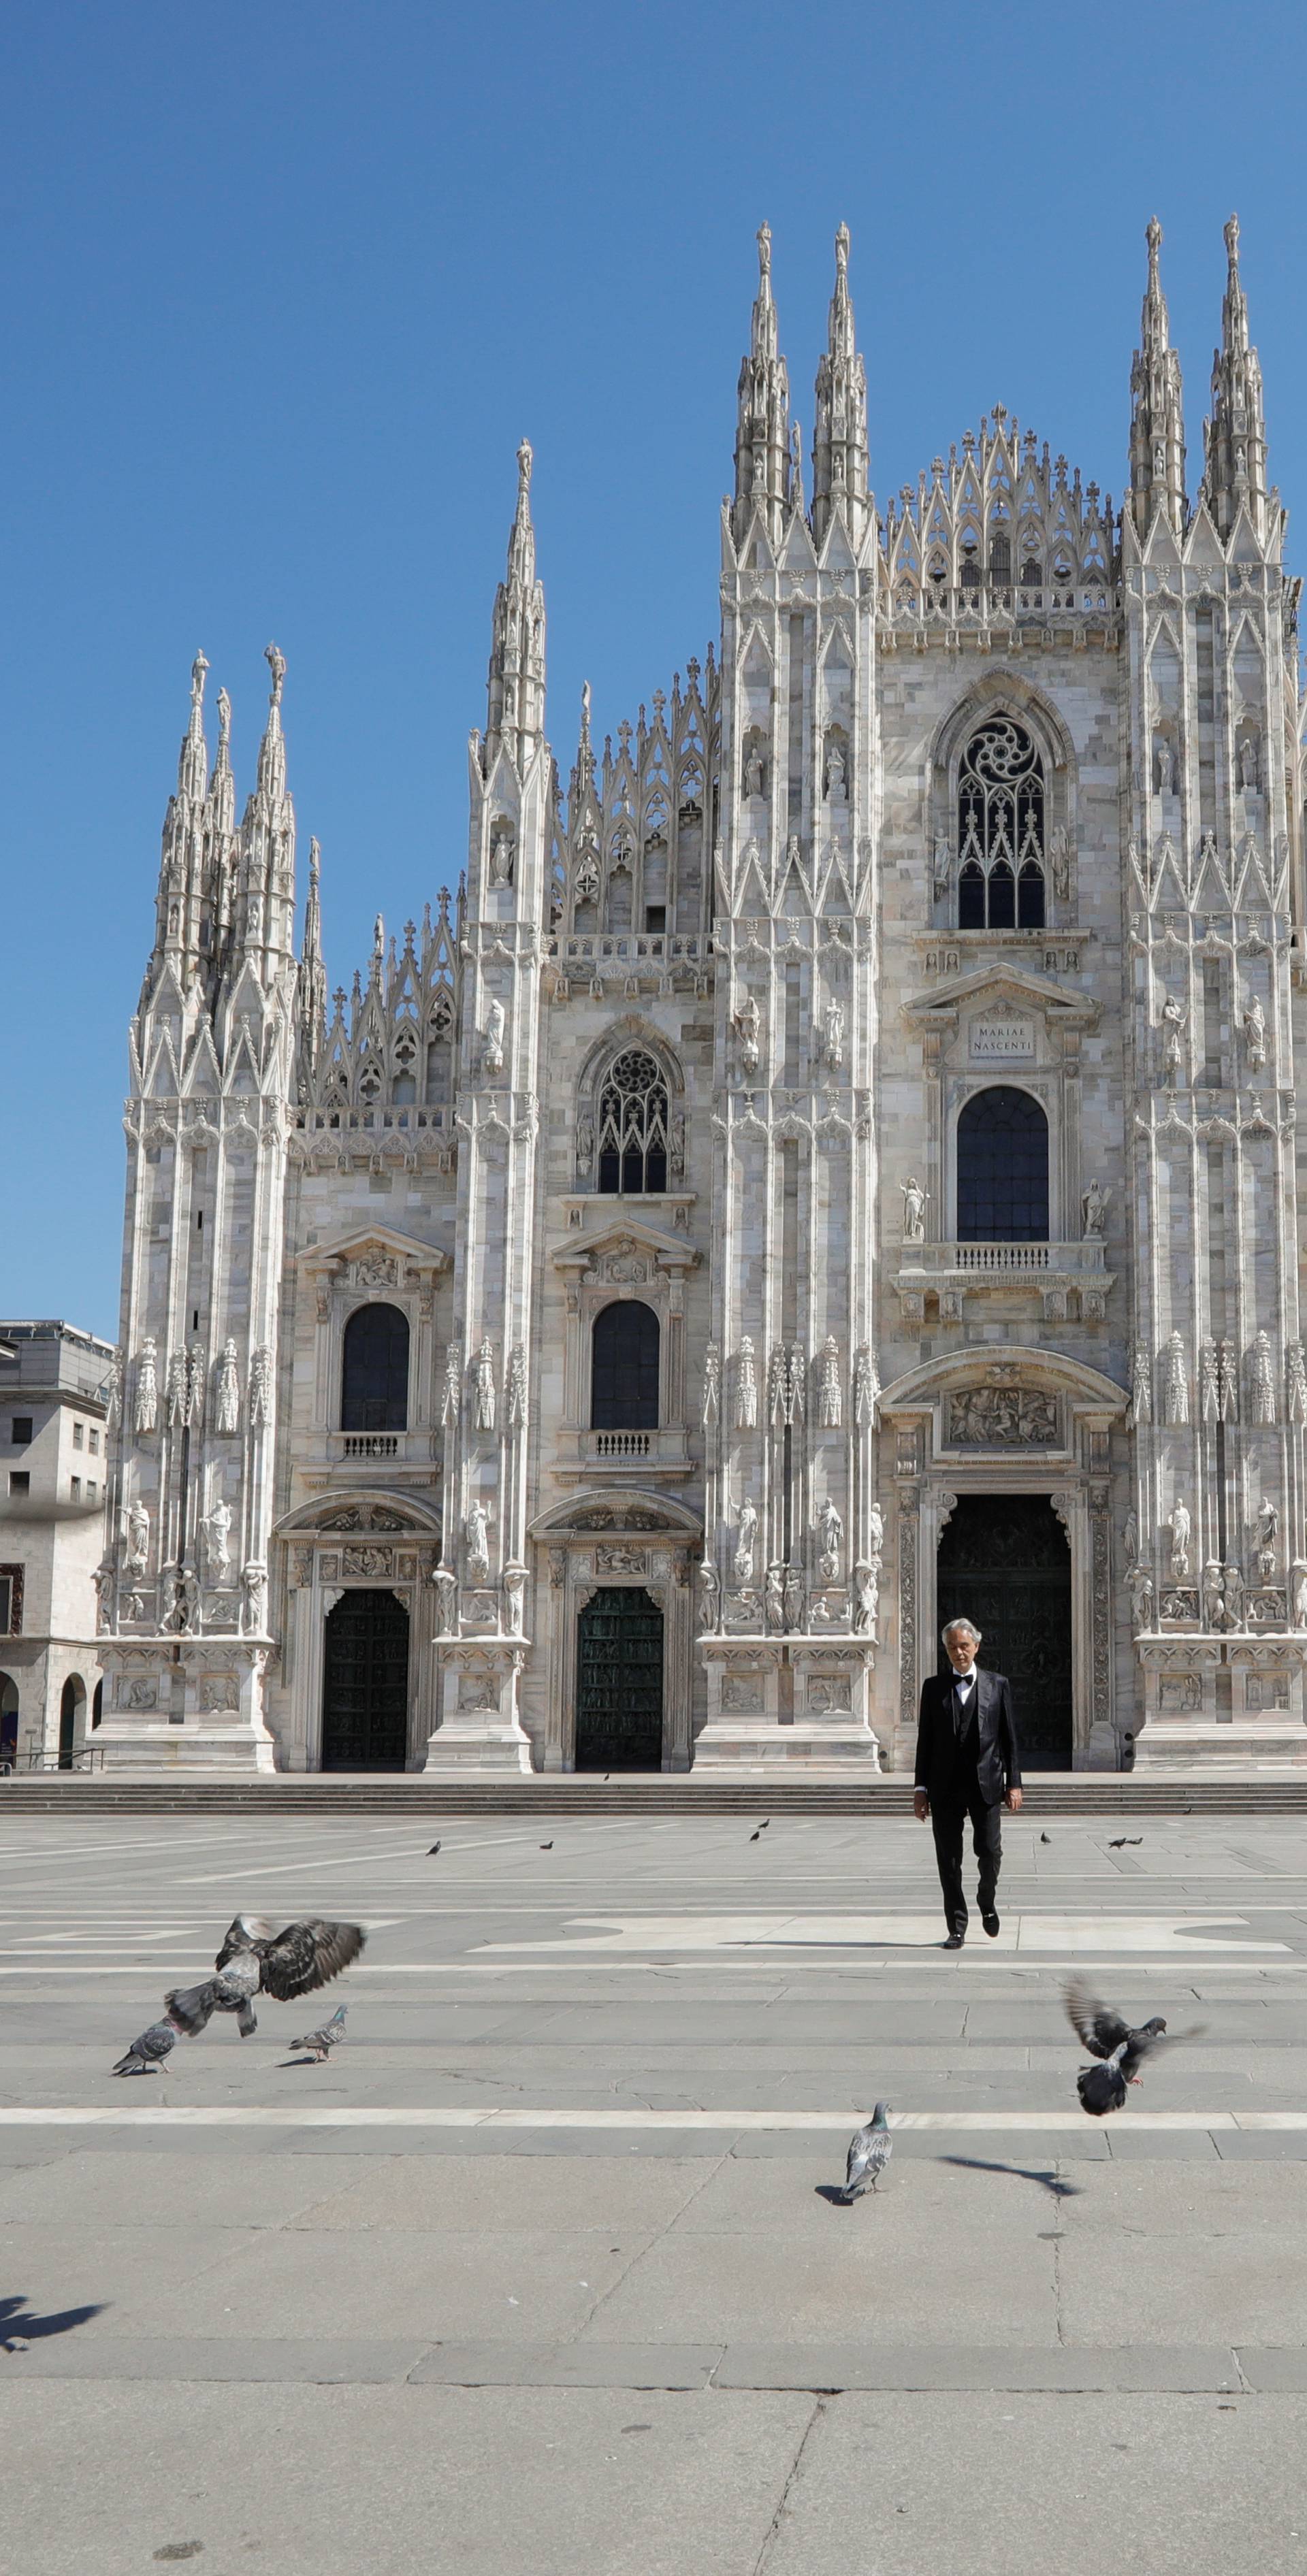 Italian opera singer Andrea Bocelli participates in ''Music for hope'' event at an empty Duomo Cathedral in Milan